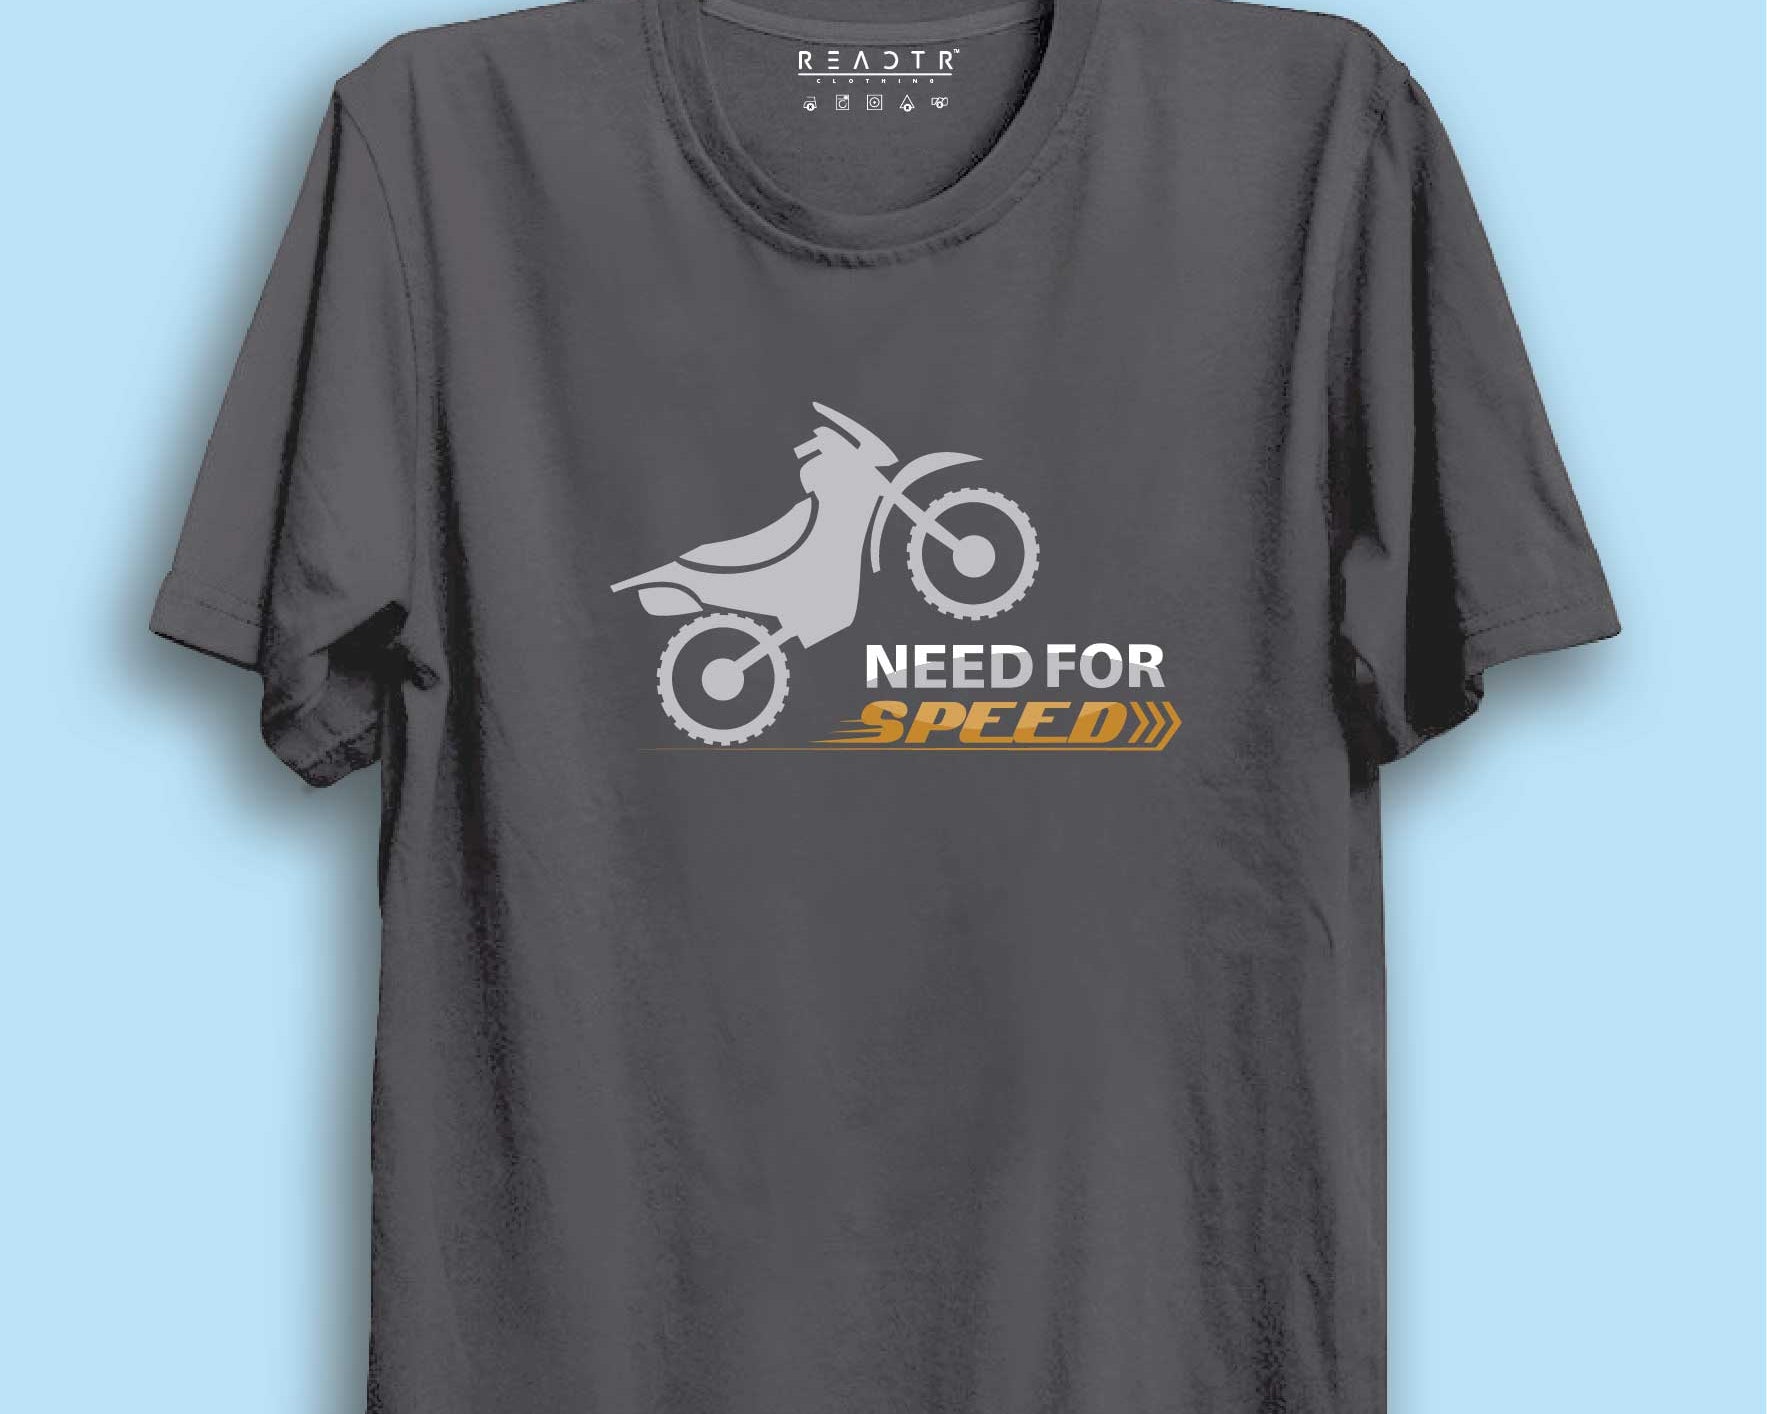 Need For Speed Reactr Tshirts For Men - Eyewearlabs